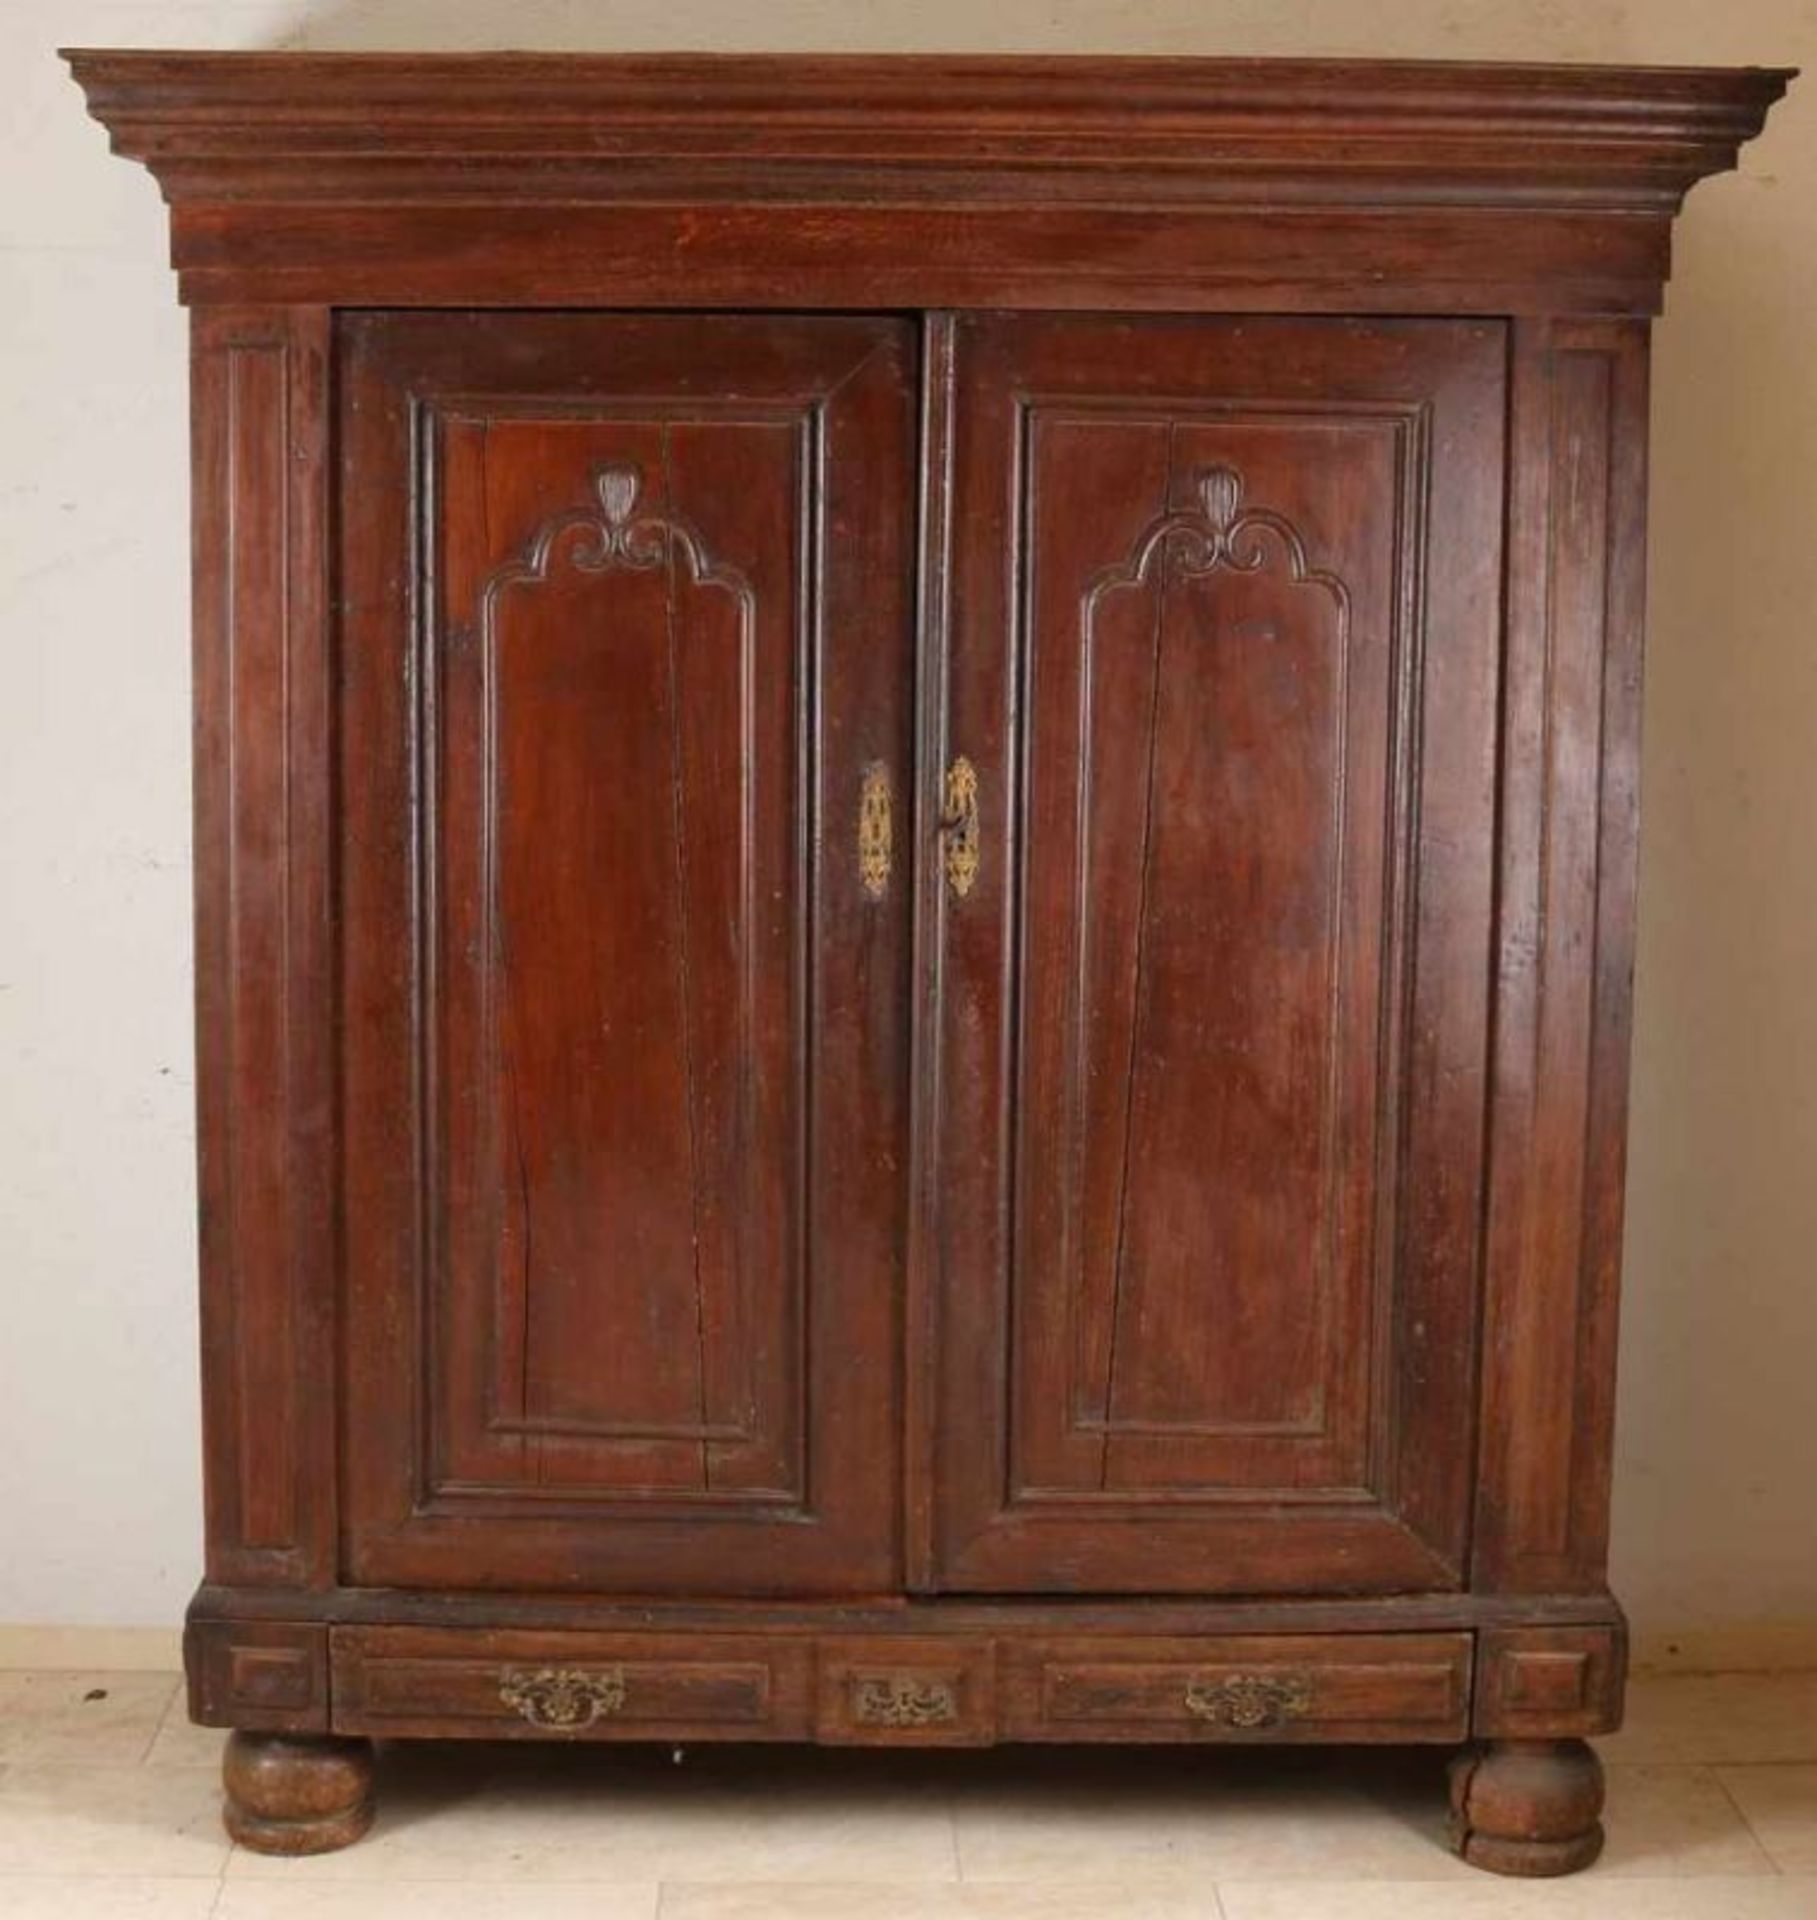 18th century Louis Quinze oak oak cabinet with carving, fixed shelves and removable head and